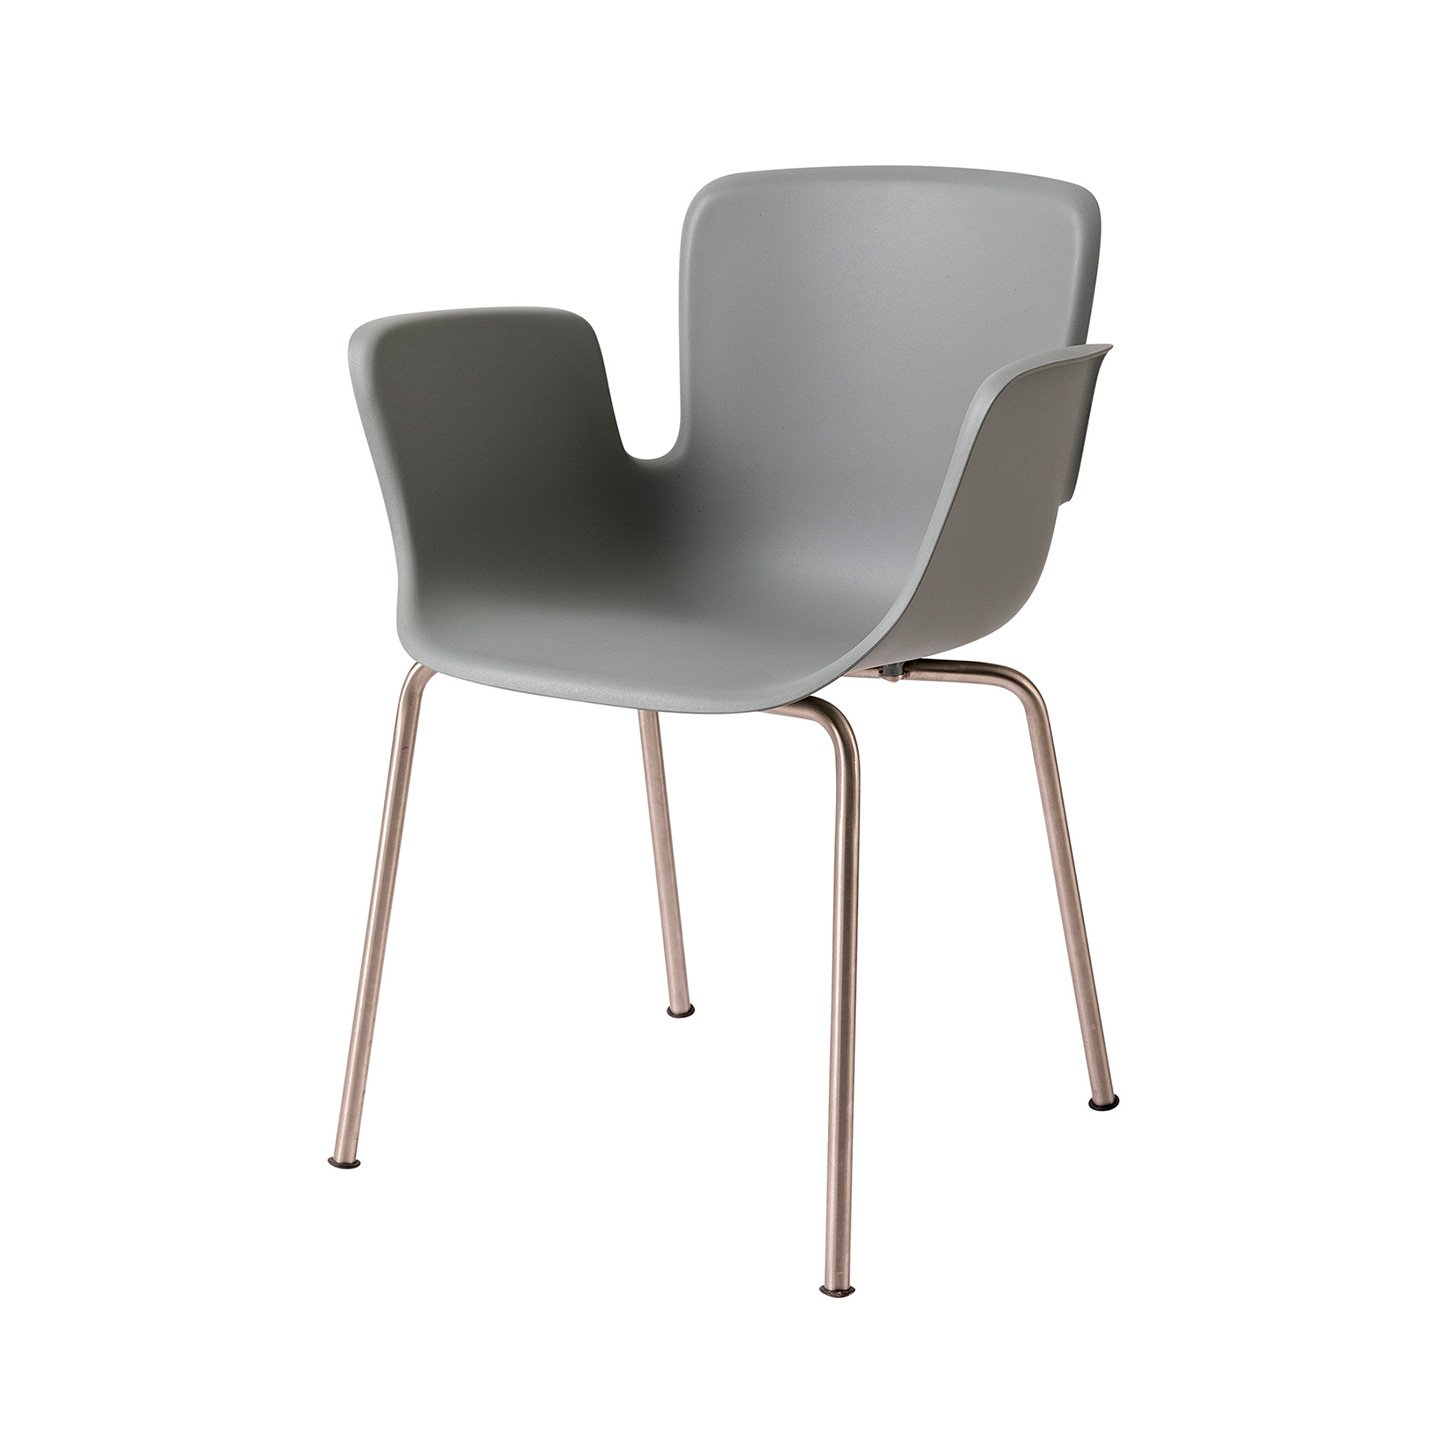 Juli Re-Plastic is the four-leg base outdoor chair made of stainless steel and the shell is realized with recycled and recyclable polypropylene reinforced with fibreglass. 